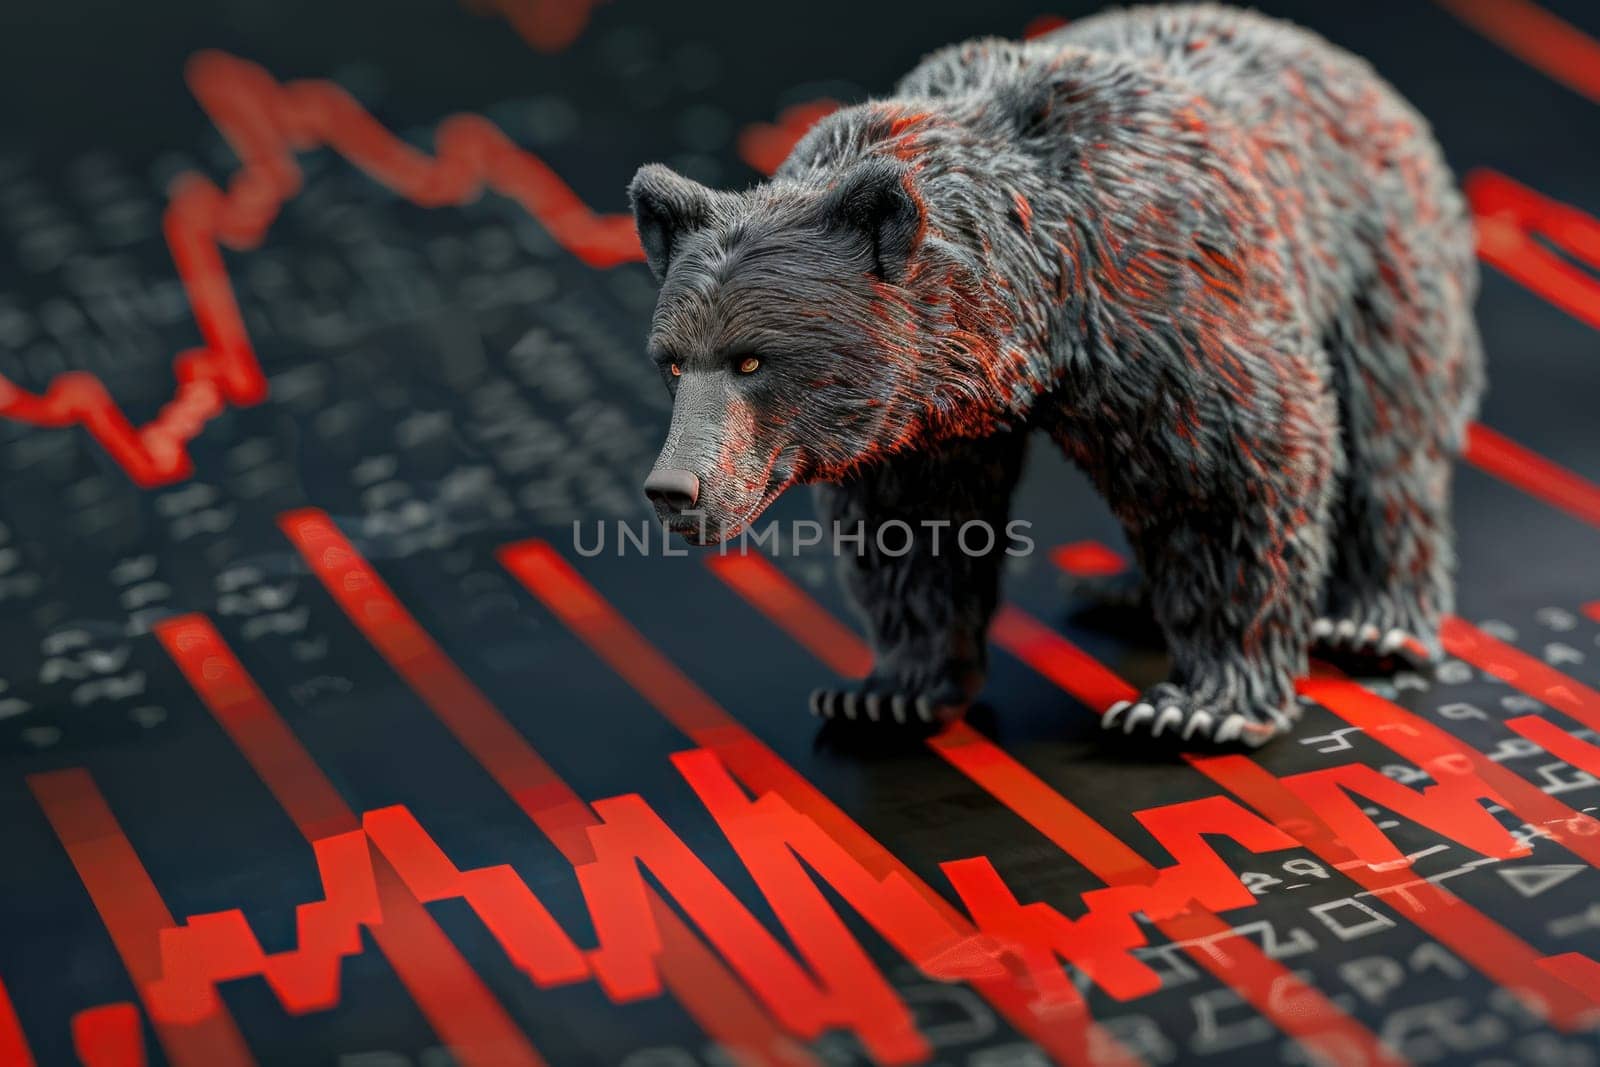 A bear is standing in front of a graph with red lines. The bear is looking at the graph, and the red lines seem to be indicating a downward trend. Concept of uncertainty and instability